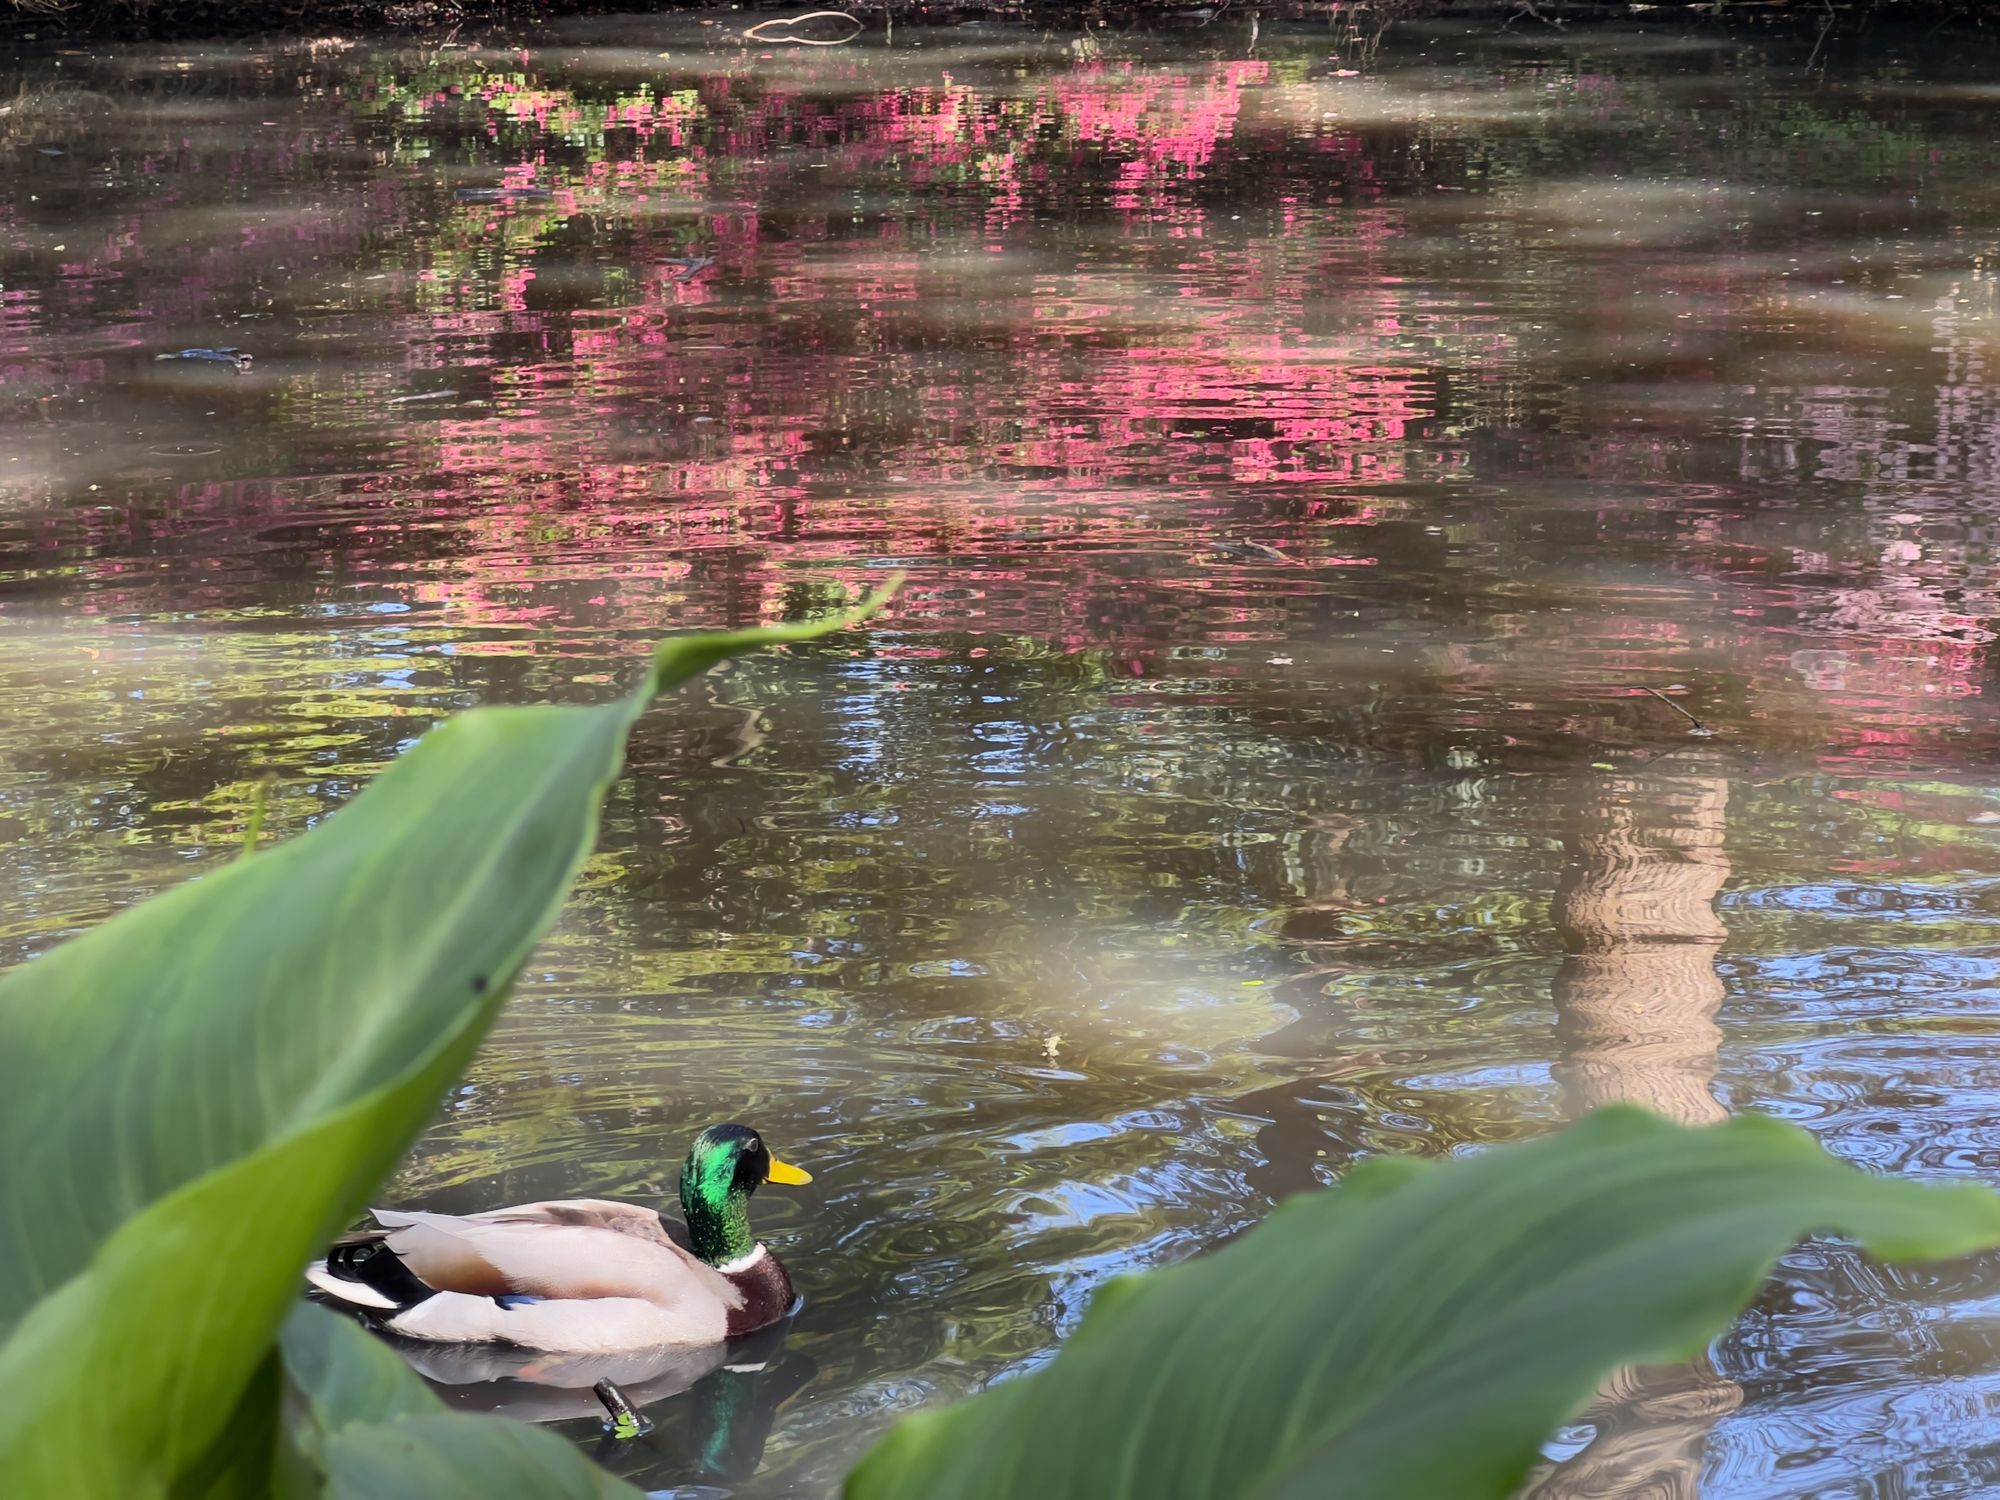 A mallard swims on a small pond, with some big leaves in the foreground and trees and pink and red blossom reflected on the pond surface.